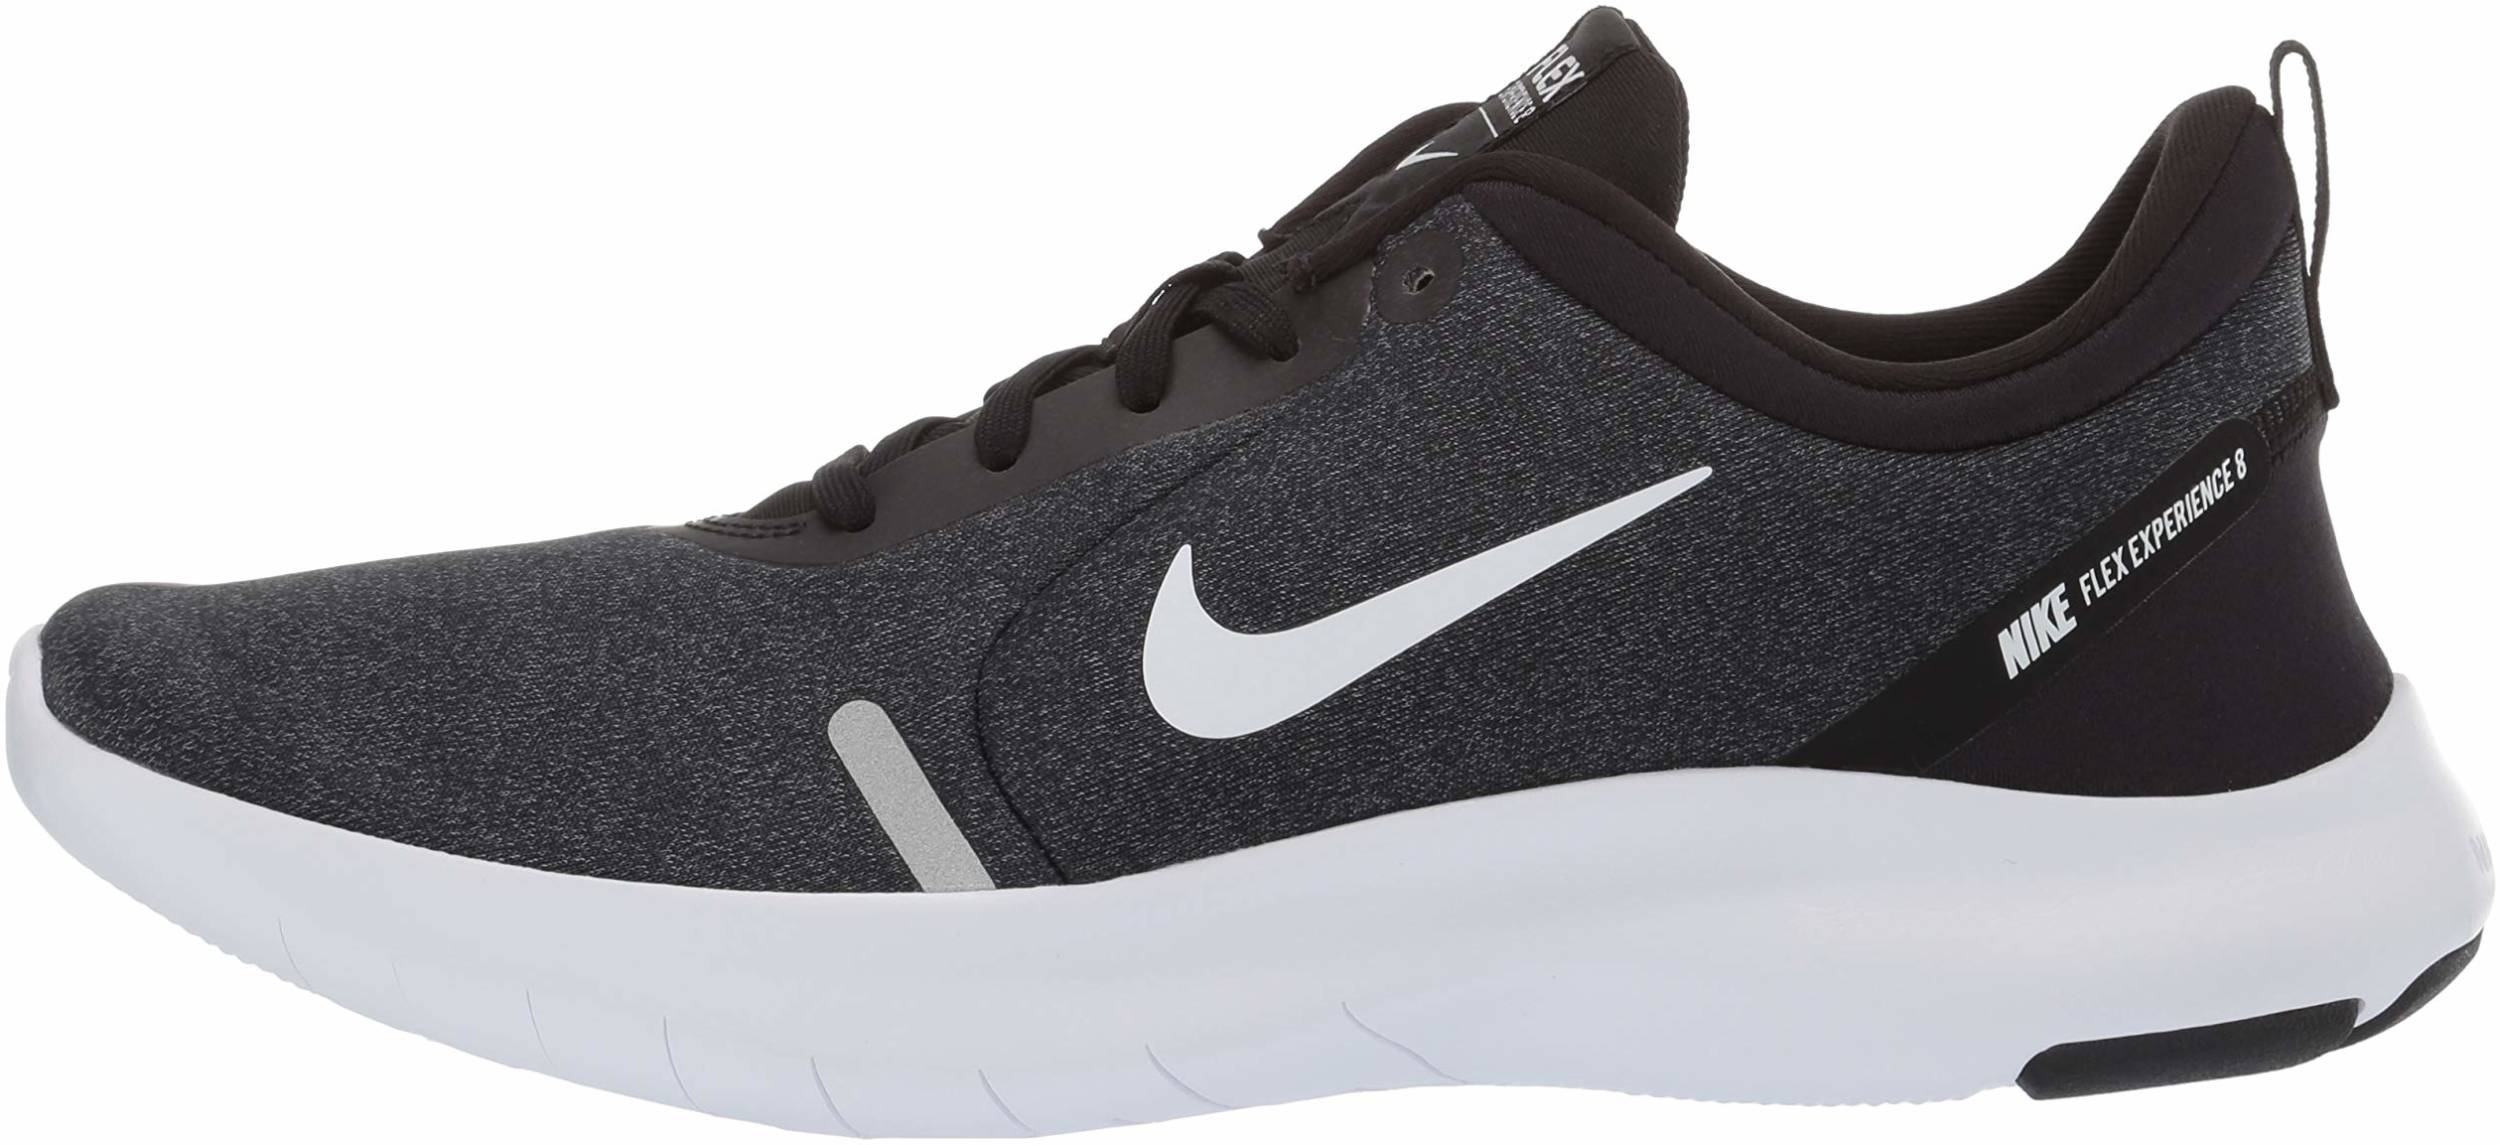 Save 46% on Nike Neutral Running Shoes 